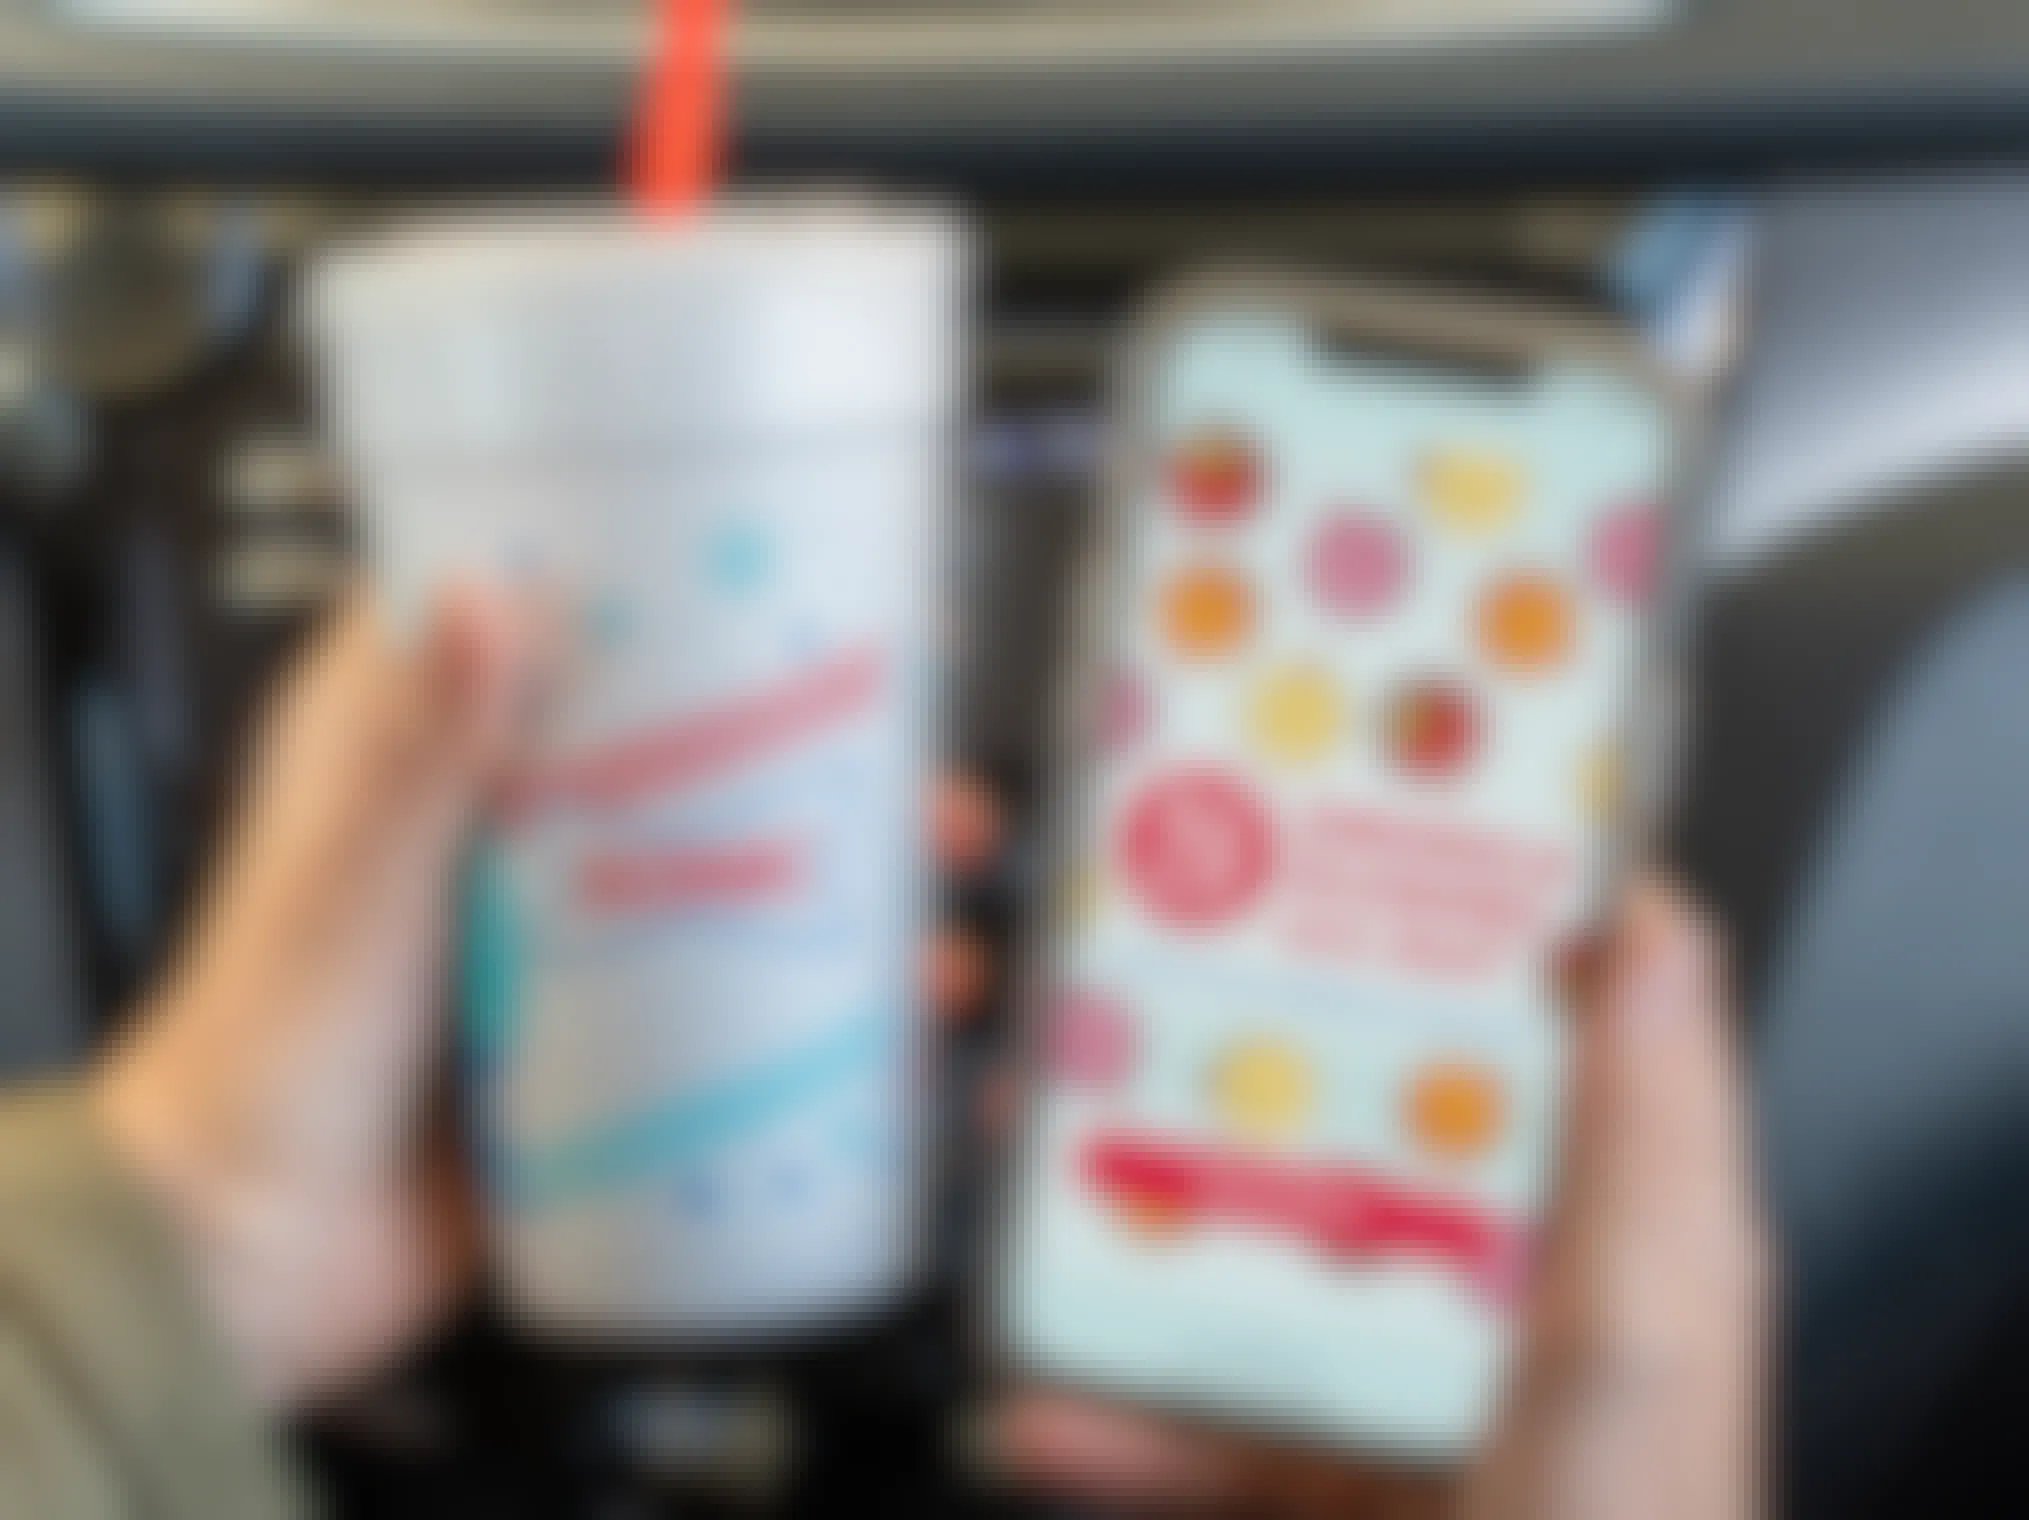 1/2 drinks and slushes all day" ad inside the Sonic app on a cell phone, next to a sonic cup.